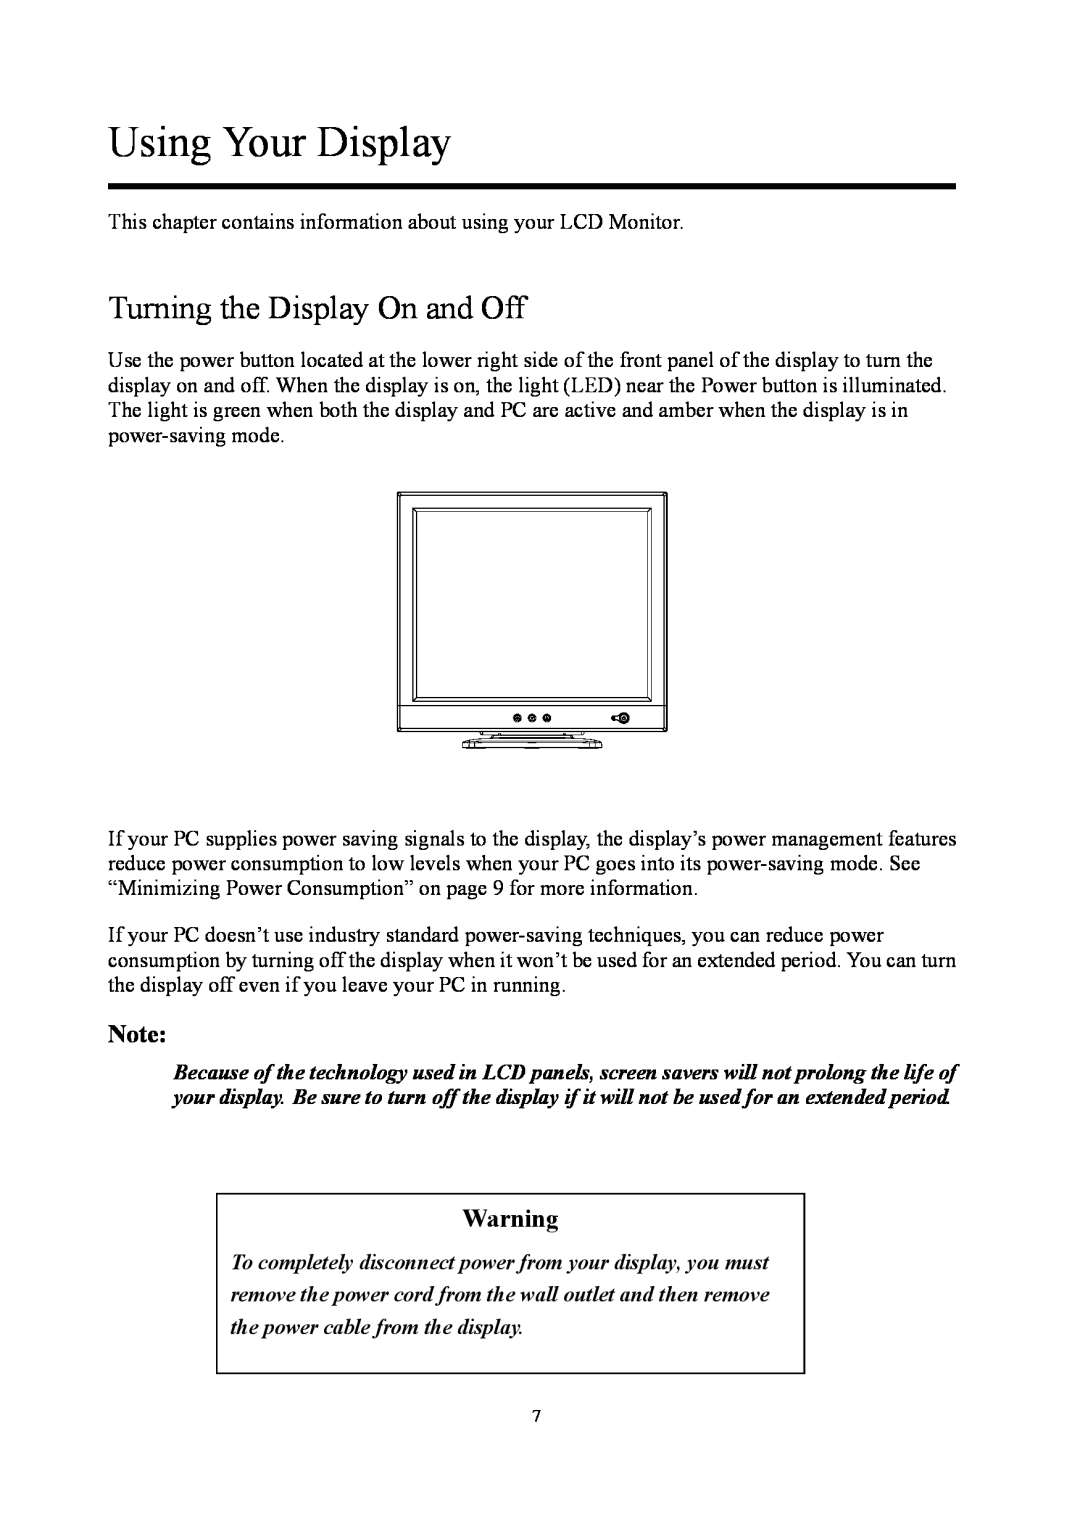 Planar PE1900 manual Using Your Display, Turning the Display On and Off 